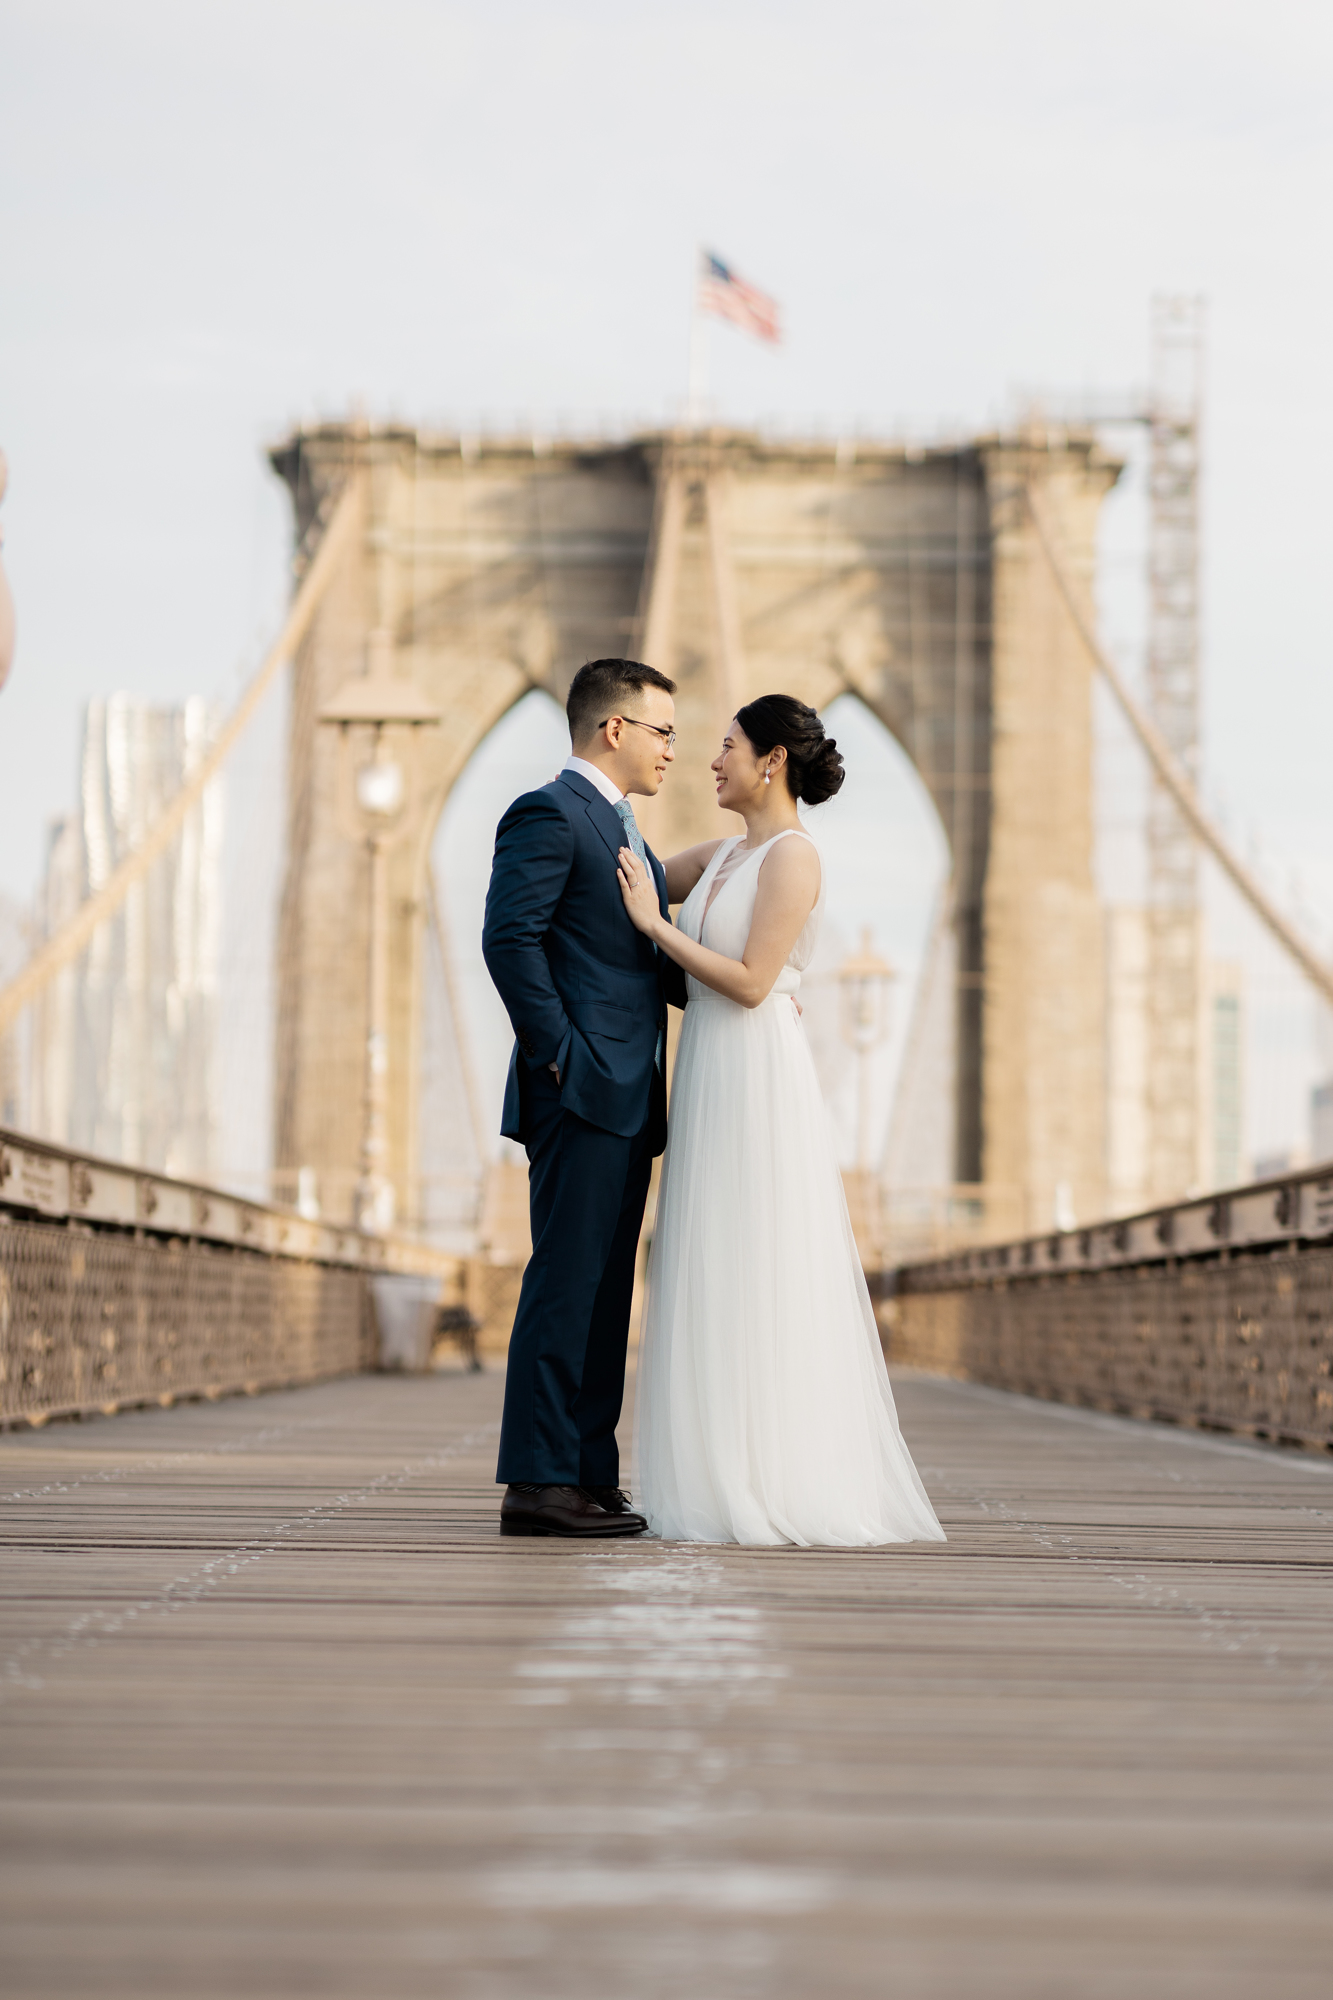 Sensational Photos of New York Elopement in DUMBO and Central Park